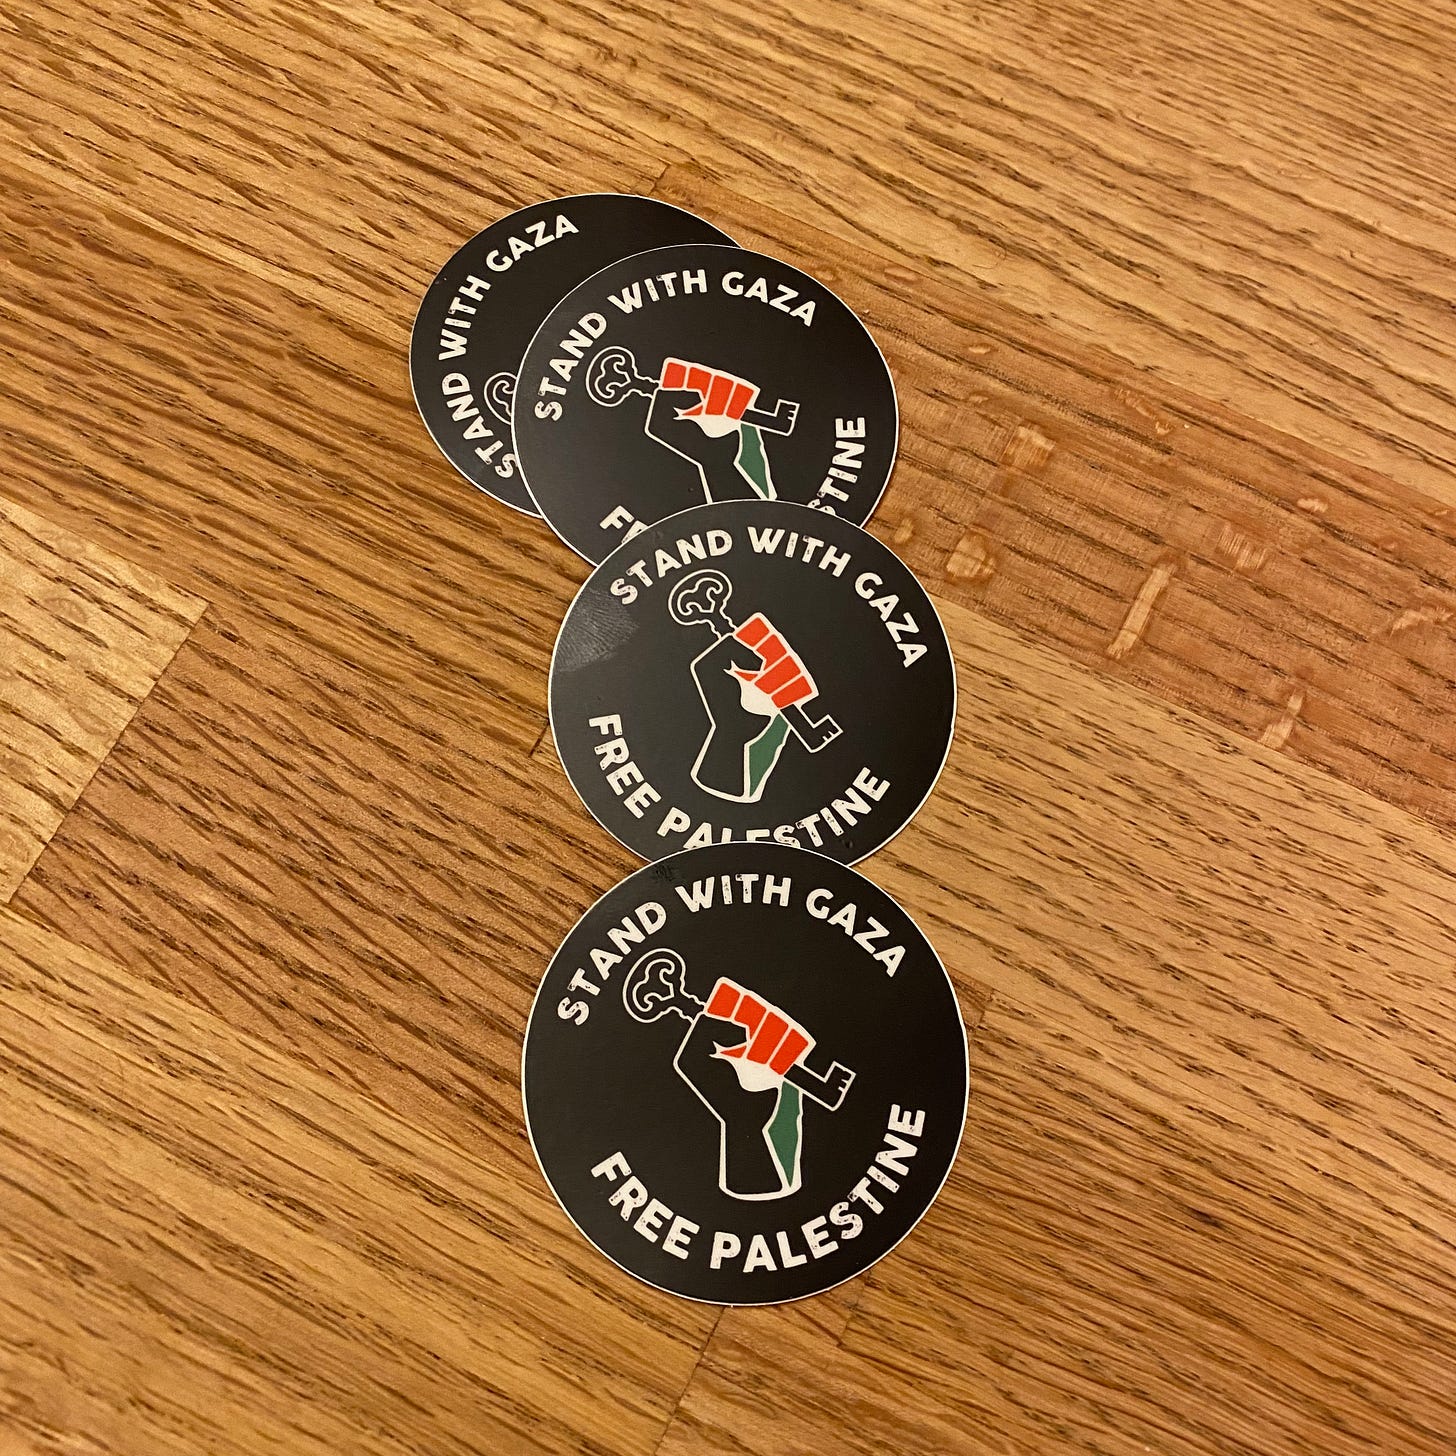 Four small black stickers on a wooden counter that say: Stand With Gaza. Free Palestine. In the center of each sticker is a fist holding a key in the colors of the Palestinian flag.